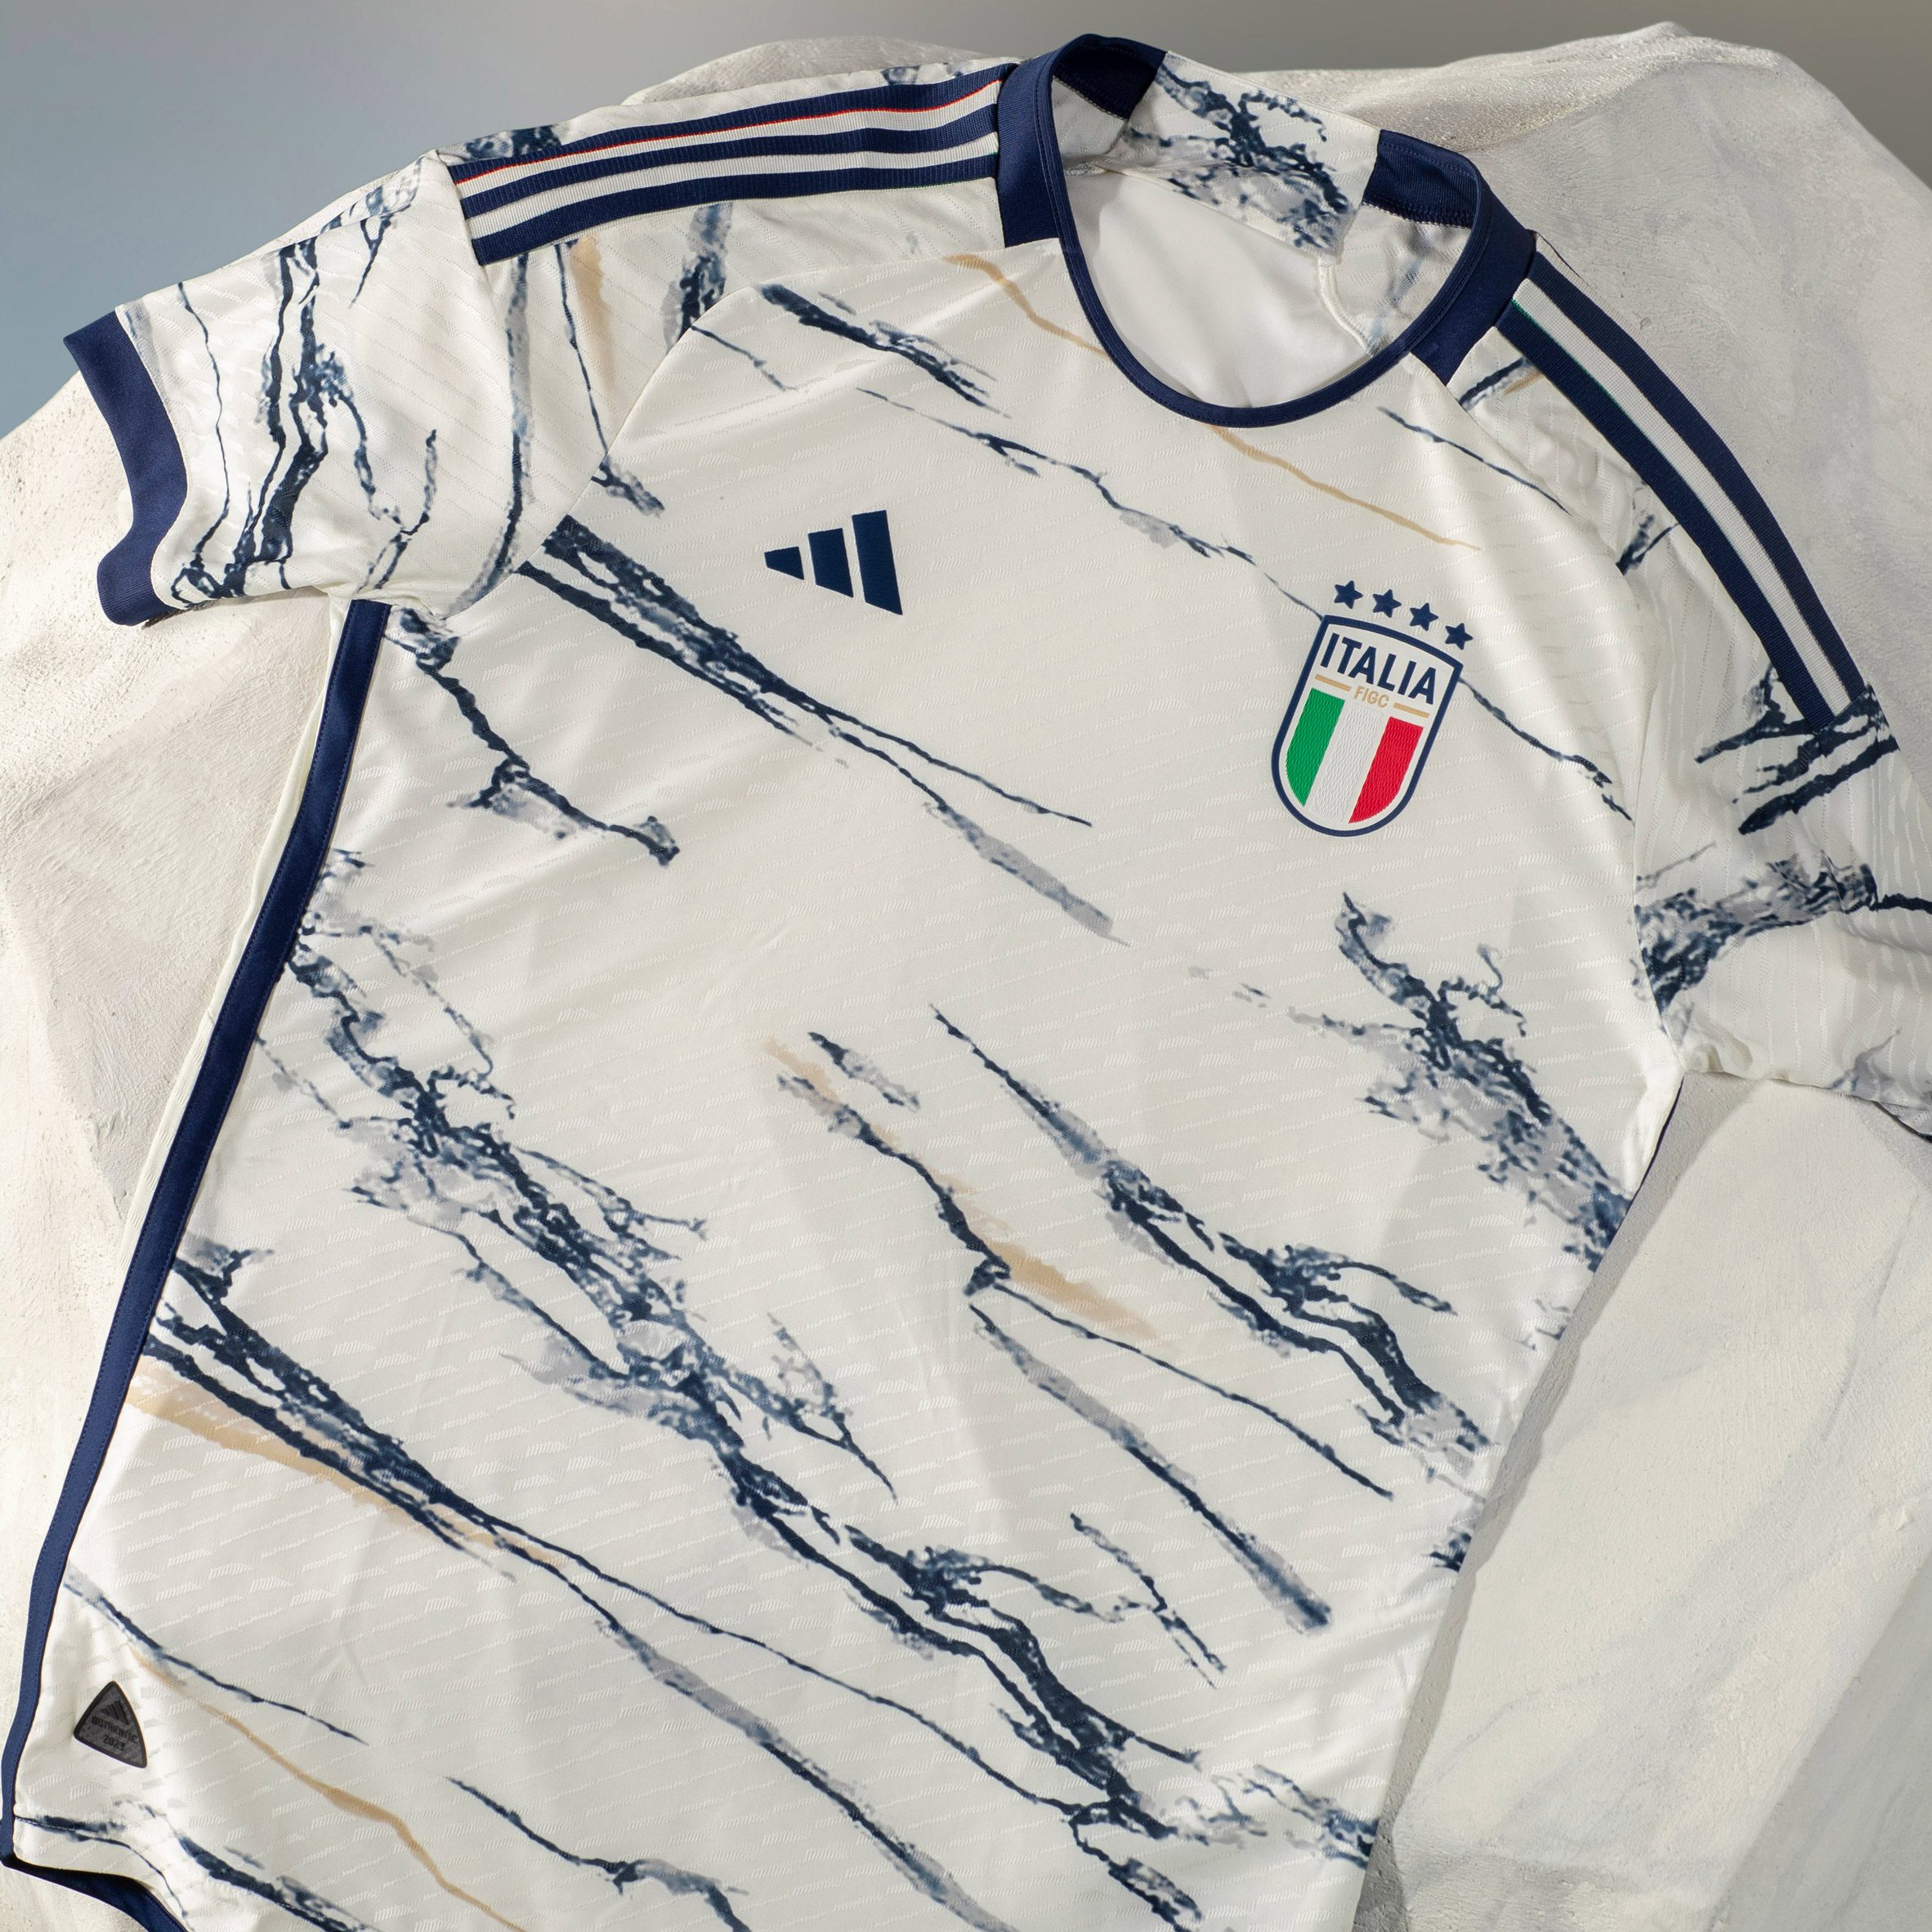 Italy jersey by Adidas